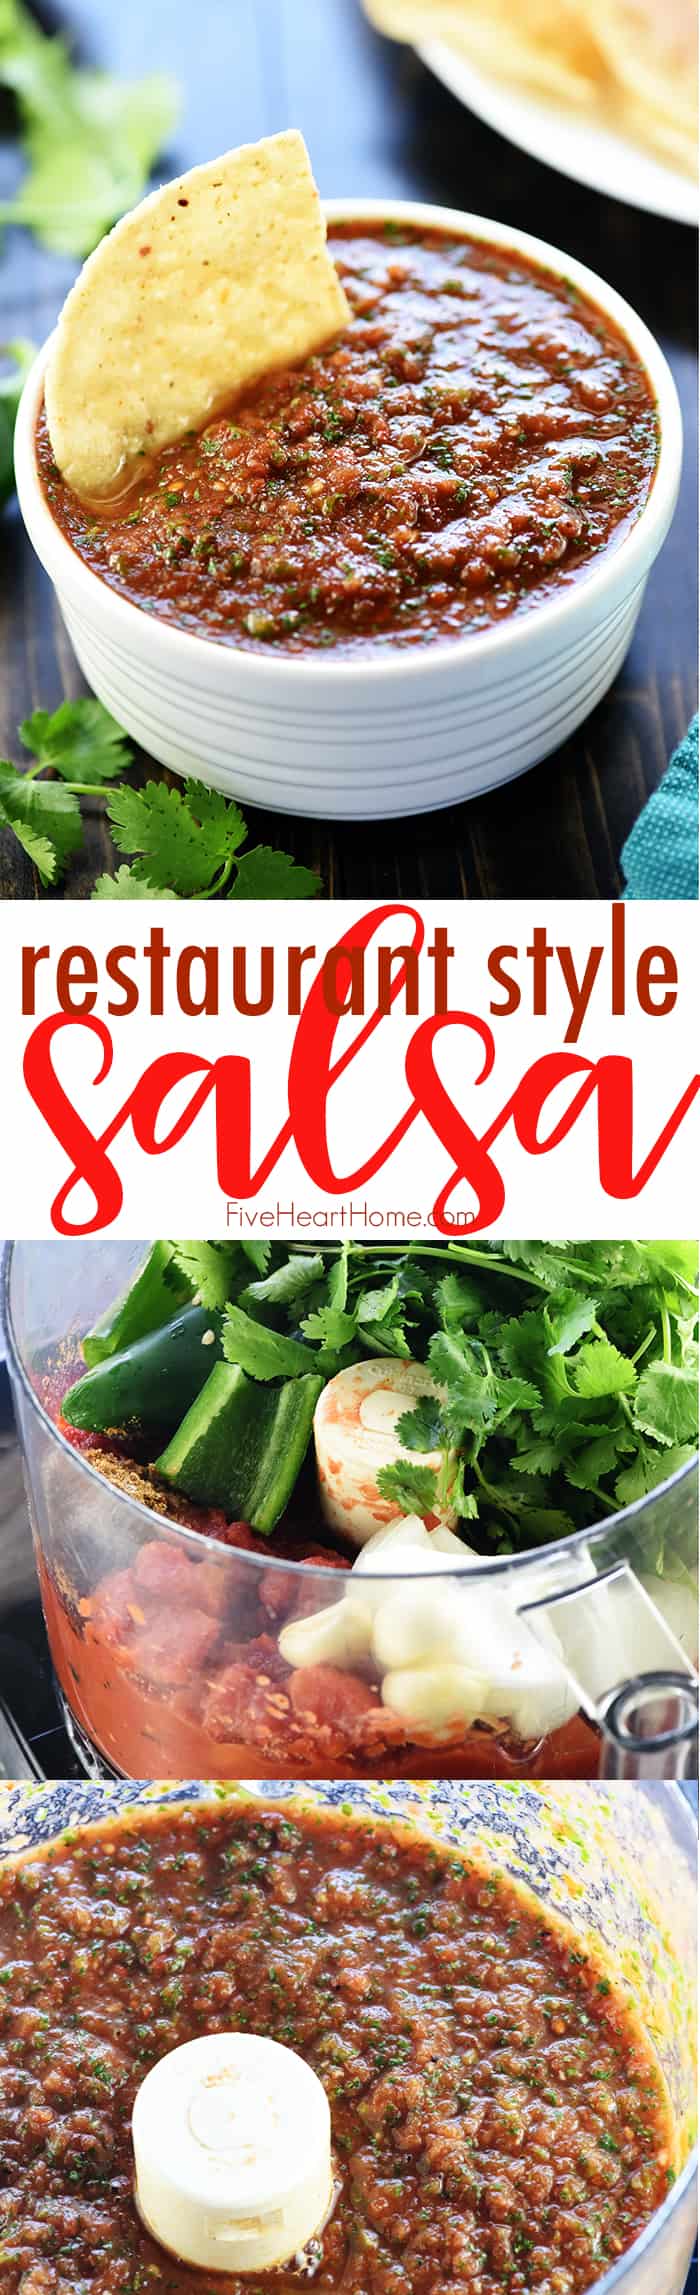 Easy Restaurant Style Salsa ~ this fresh, homemade recipe takes just a few minutes to throw together in the blender or food processor and rivals the best of restaurant style salsas! | FiveHeartHome.com via @fivehearthome